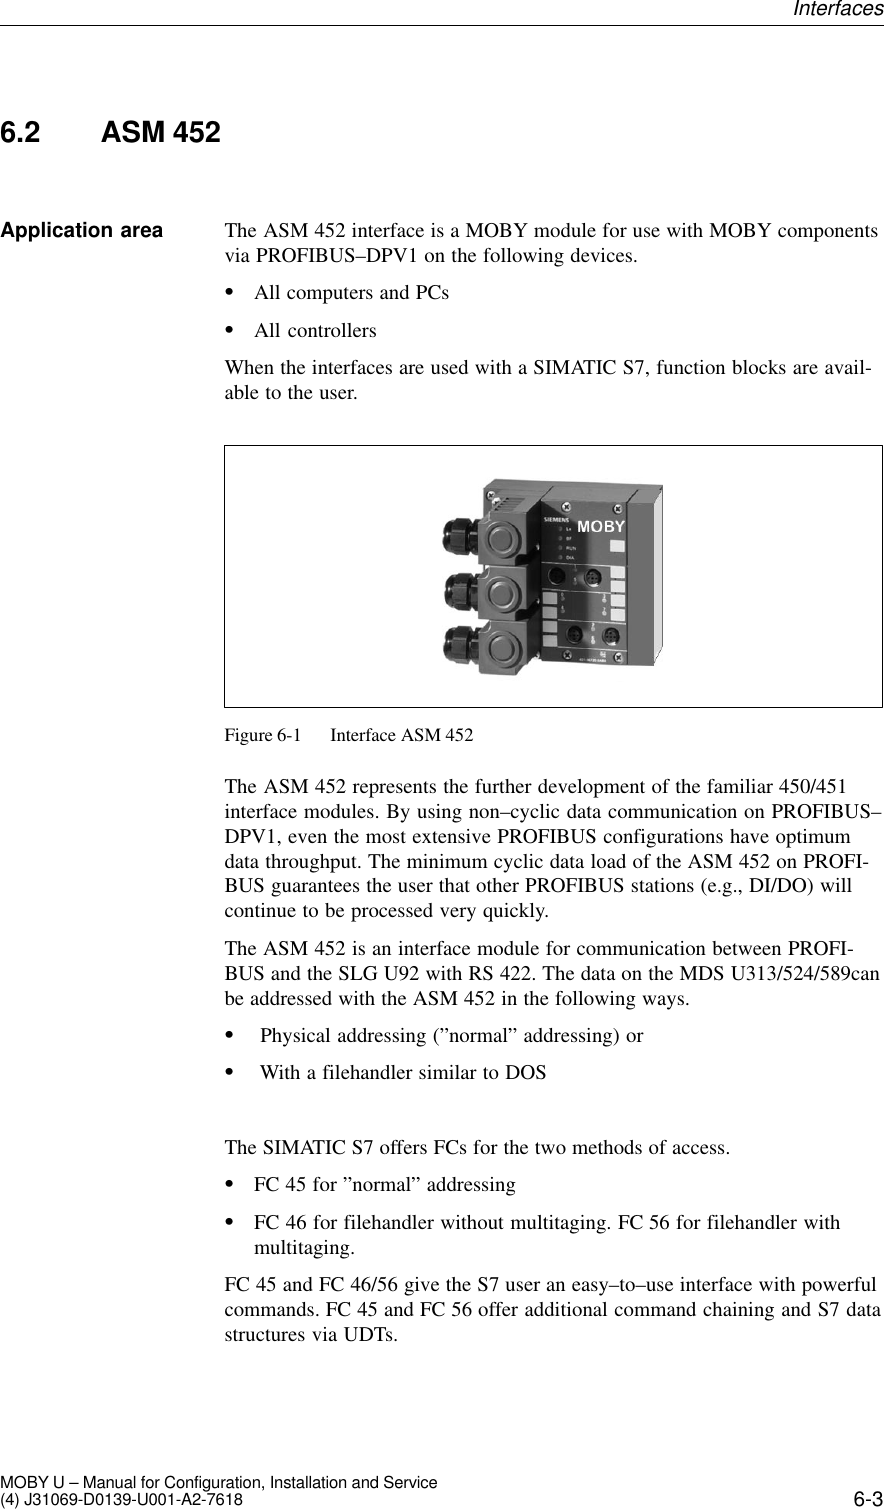 6-3MOBY U – Manual for Configuration, Installation and Service(4) J31069-D0139-U001-A2-76186.2 ASM 452The ASM 452 interface is a MOBY module for use with MOBY componentsvia PROFIBUS–DPV1 on the following devices.All computers and PCsAll controllersWhen the interfaces are used with a SIMATIC S7, function blocks are avail-able to the user.Figure 6-1 Interface ASM 452The ASM 452 represents the further development of the familiar 450/451interface modules. By using non–cyclic data communication on PROFIBUS–DPV1, even the most extensive PROFIBUS configurations have optimumdata throughput. The minimum cyclic data load of the ASM 452 on PROFI-BUS guarantees the user that other PROFIBUS stations (e.g., DI/DO) willcontinue to be processed very quickly.The ASM 452 is an interface module for communication between PROFI-BUS and the SLG U92 with RS 422. The data on the MDS U313/524/589canbe addressed with the ASM 452 in the following ways. Physical addressing (”normal” addressing) or With a filehandler similar to DOSThe SIMATIC S7 offers FCs for the two methods of access.FC 45 for ”normal” addressingFC 46 for filehandler without multitaging. FC 56 for filehandler withmultitaging.FC 45 and FC 46/56 give the S7 user an easy–to–use interface with powerfulcommands. FC 45 and FC 56 offer additional command chaining and S7 datastructures via UDTs.Application areaInterfaces